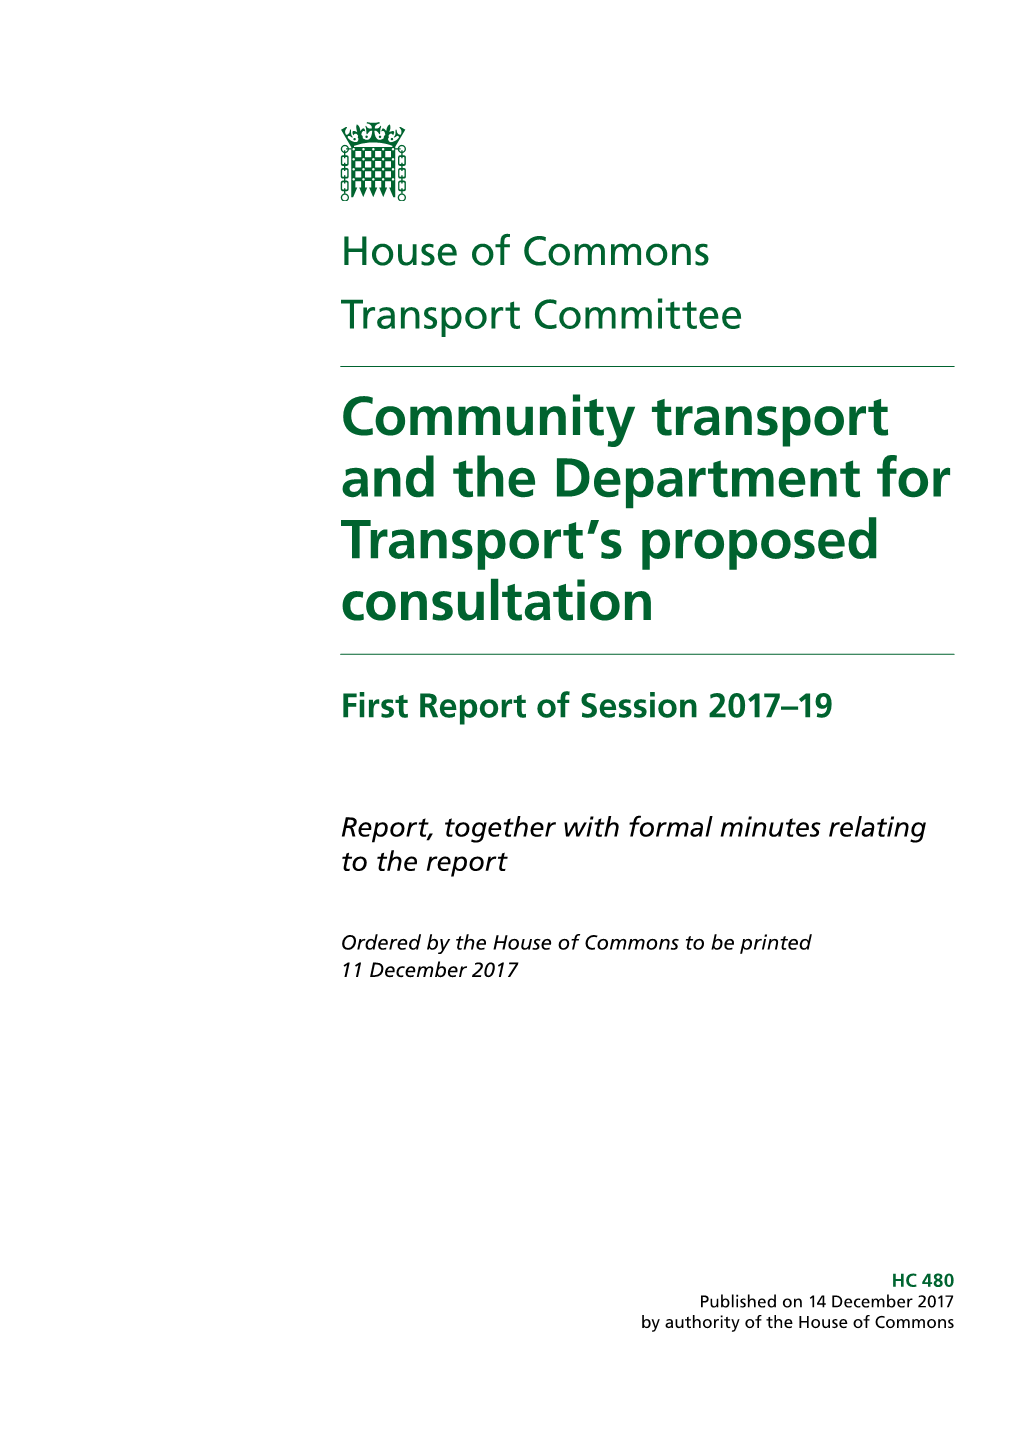 Community Transport and the Department for Transport's Proposed Consultation